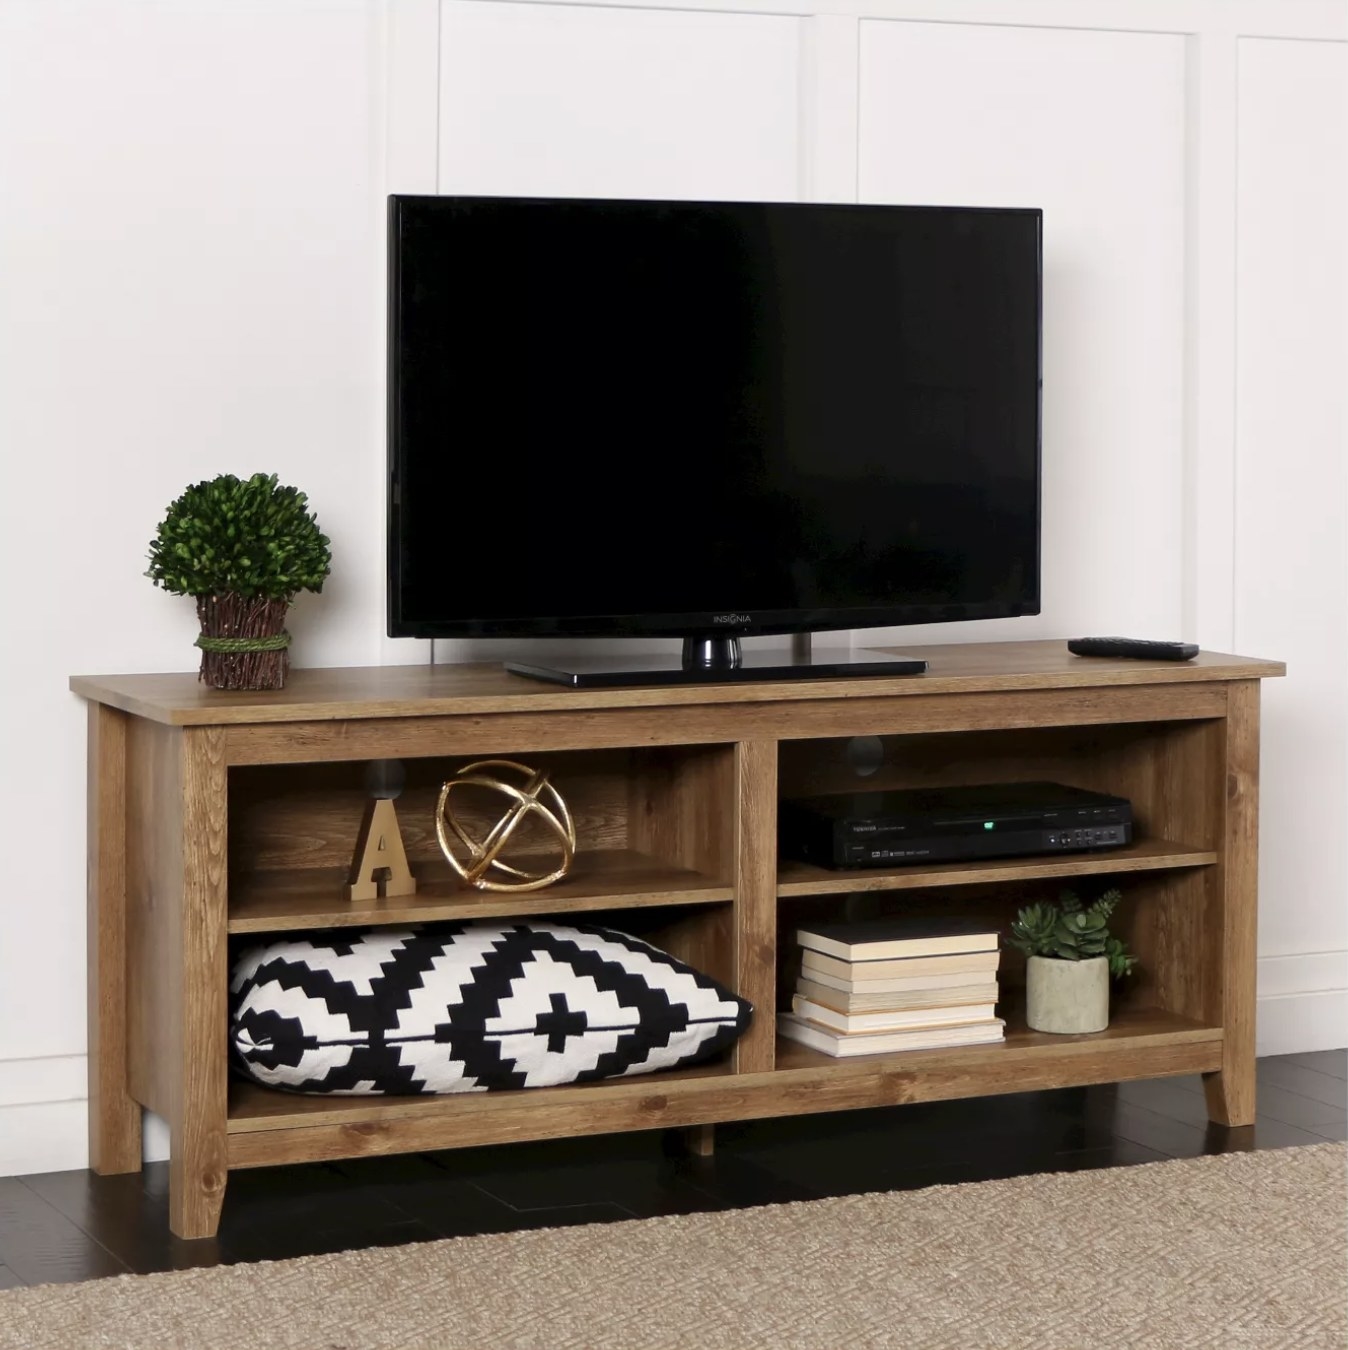 A wood TV stand with a TV on top and decor in the shelves